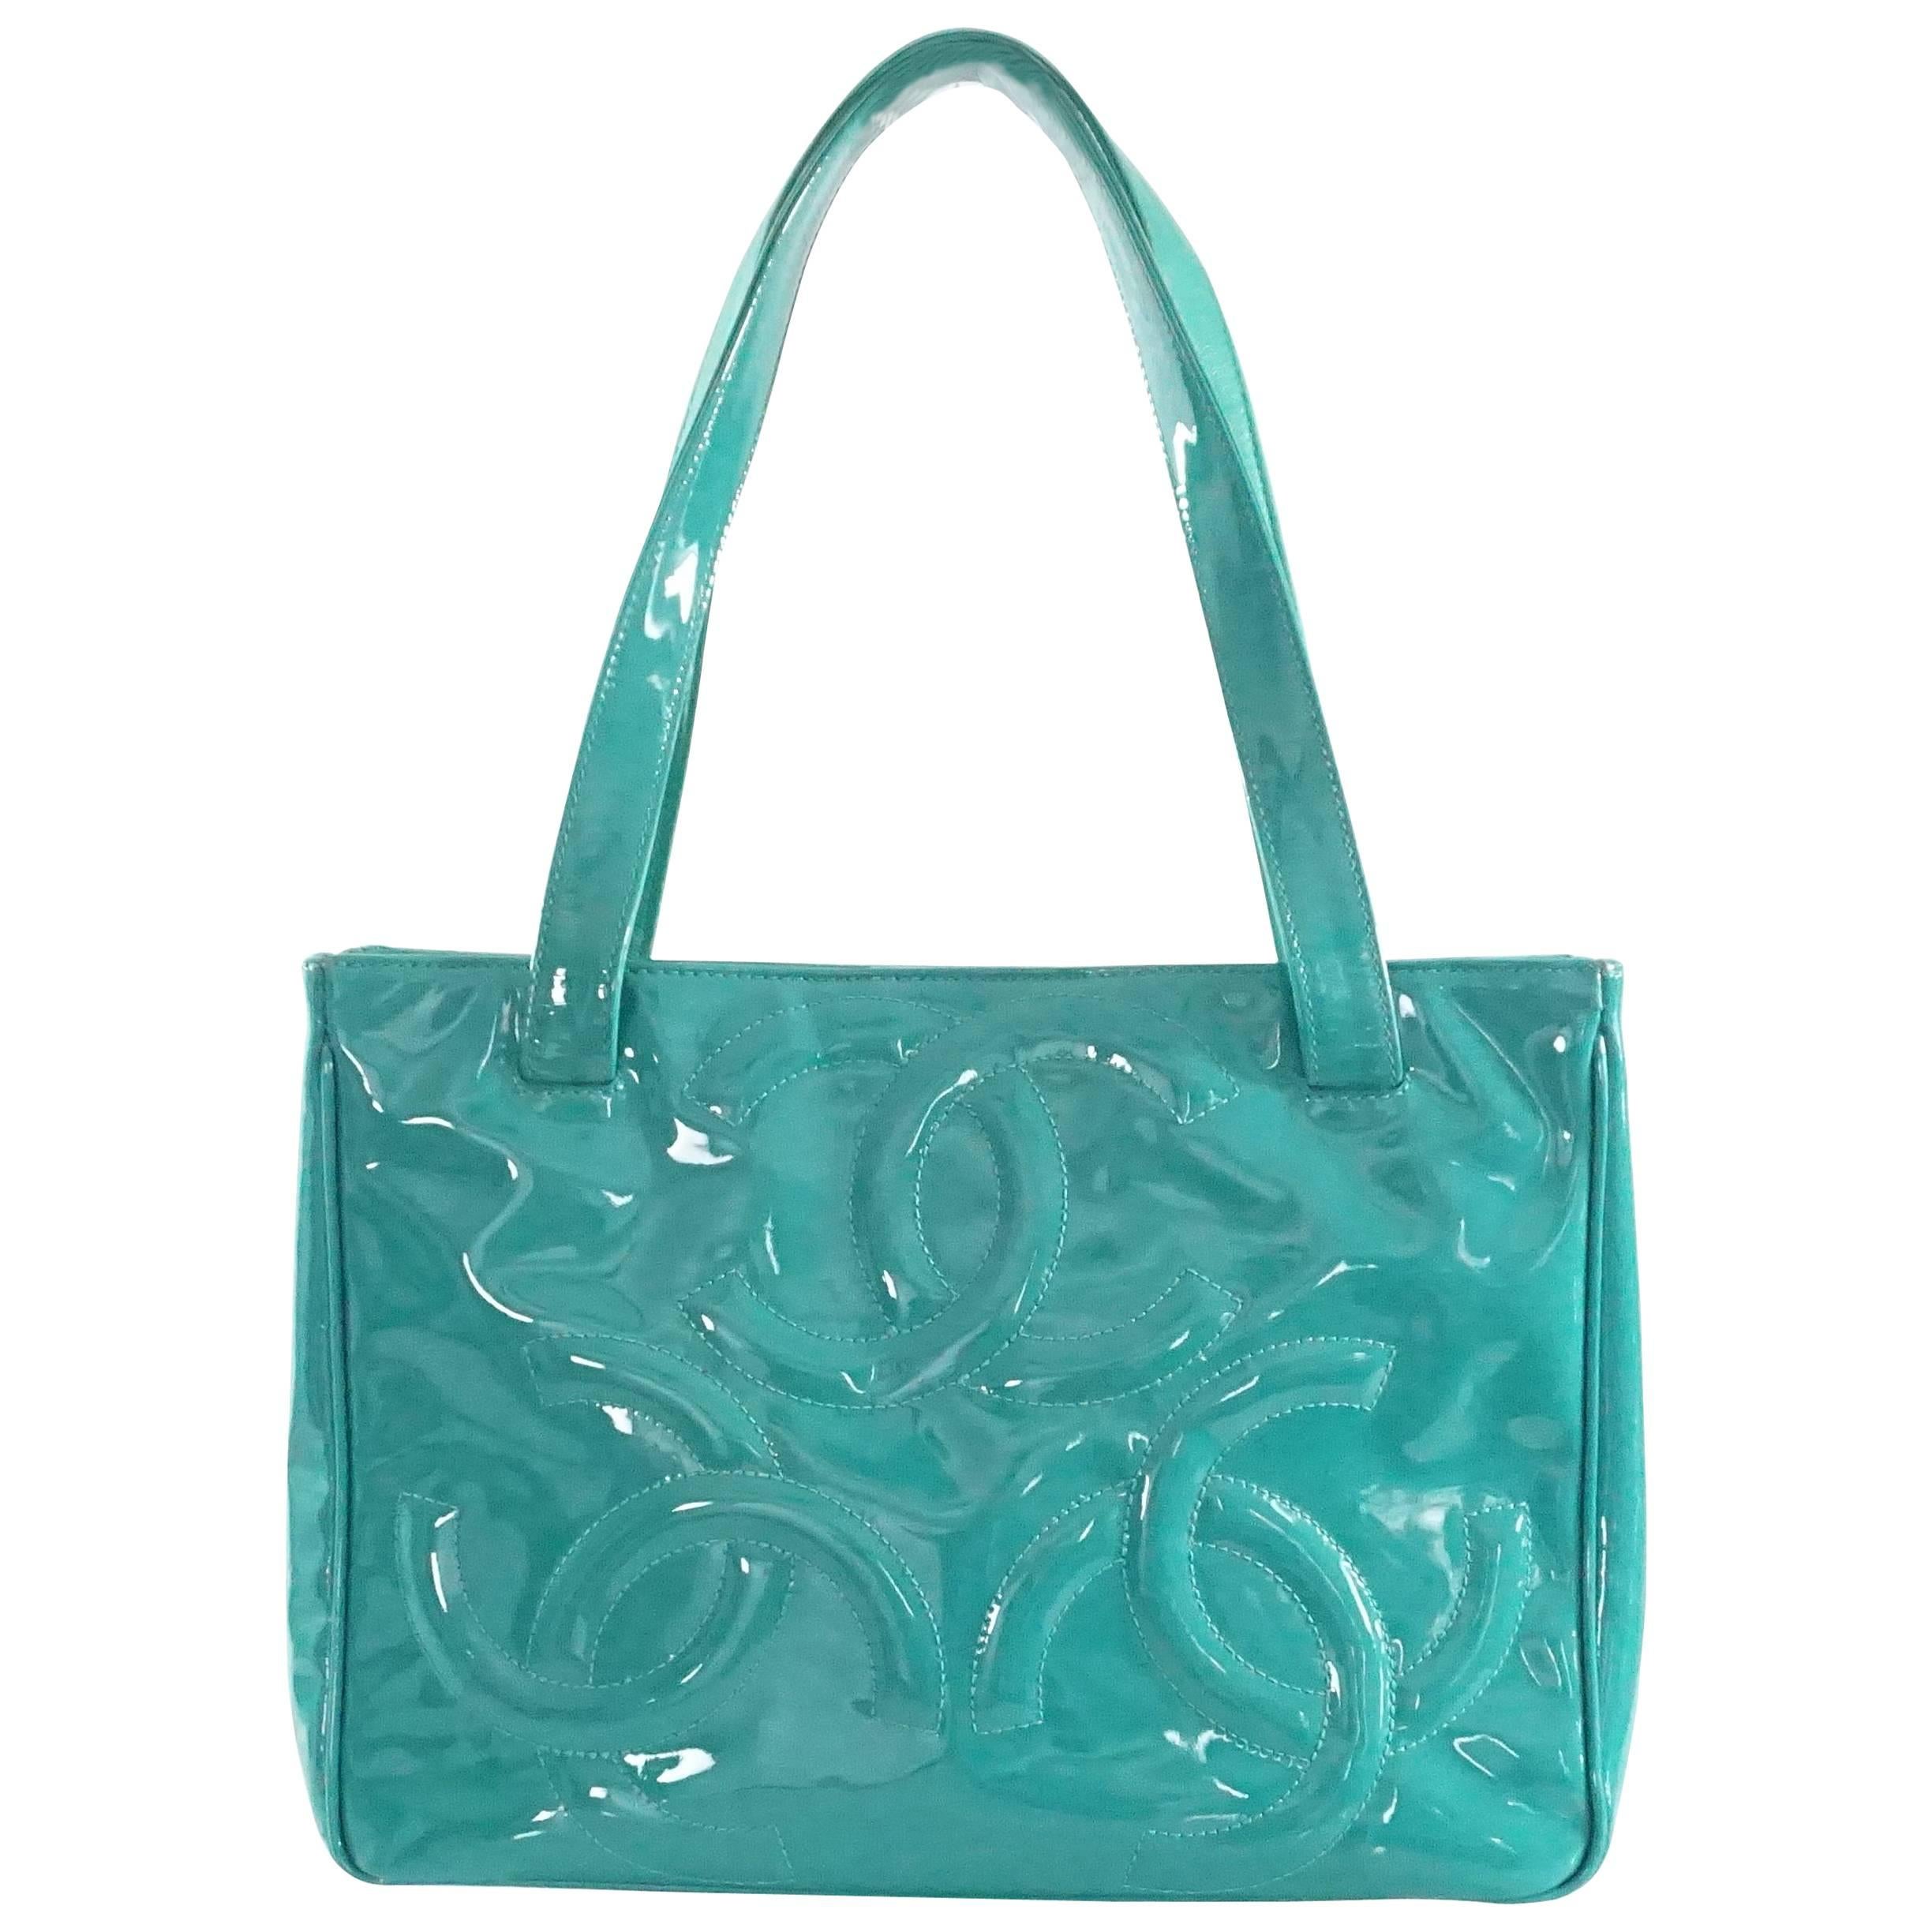 Chanel Teal Patent Mini Tote with CC Logo - 2004-2005